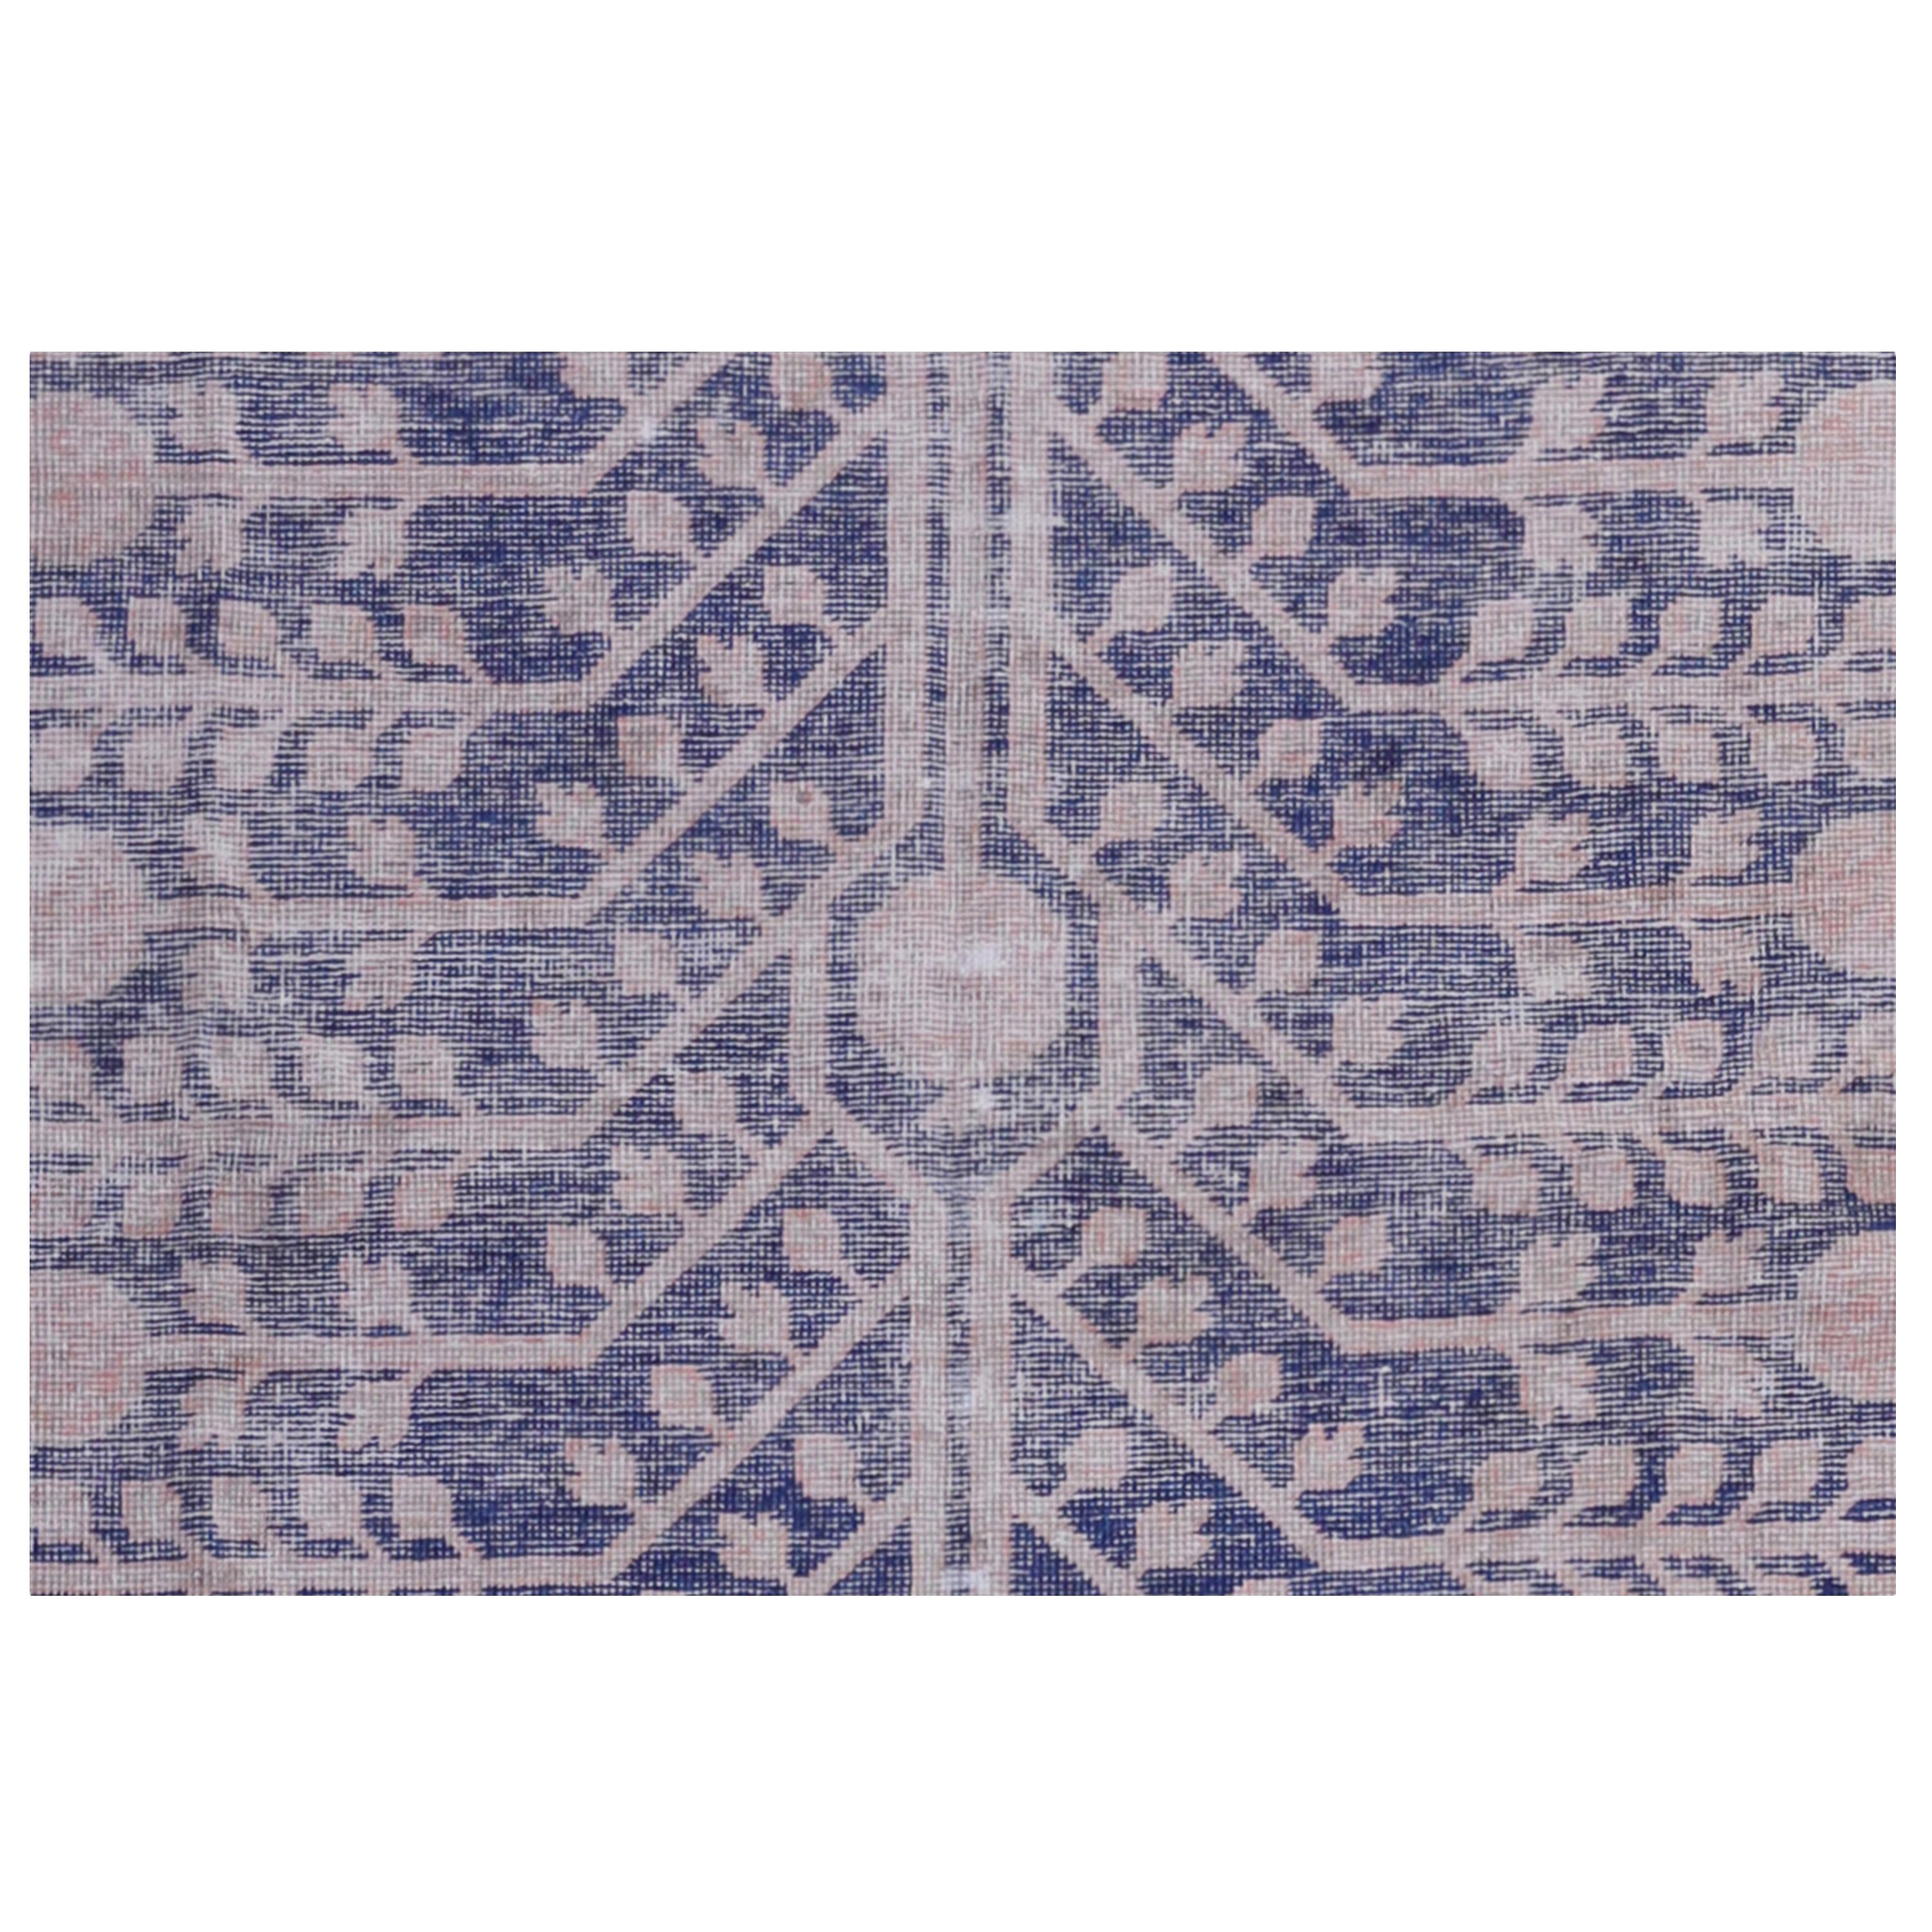 Sourced from the ancient Silk Road to bring a genuine one-of-a-kind rug to your home, this Purple Vintage Wool Cotton Blend Runner - 4'6